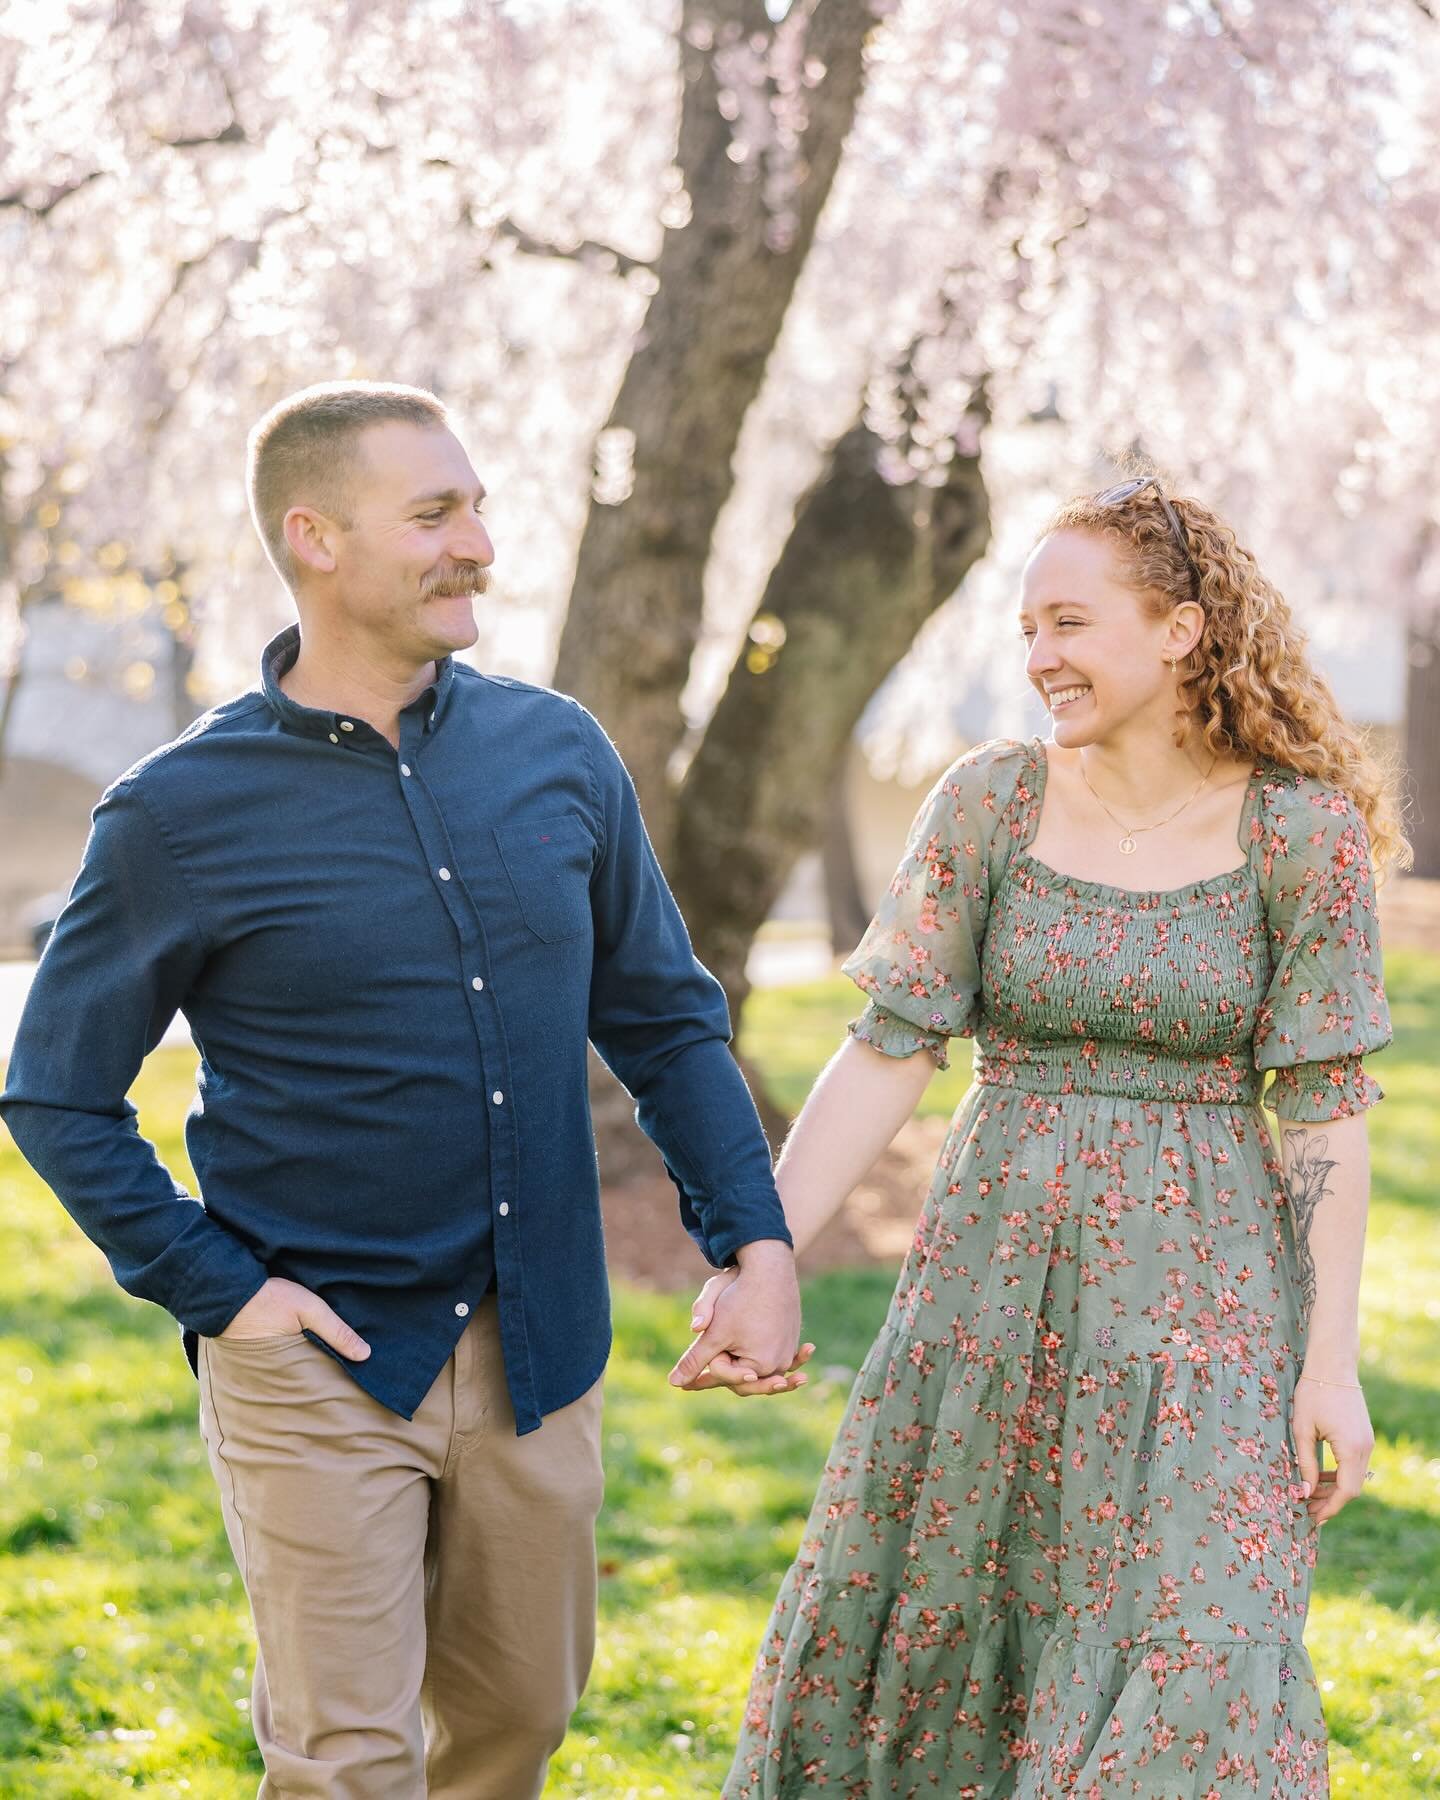 Currently finishing up editing this beautiful spring engagement session for Ashley + Vinnie! We lucked out with sunny weather for our cherry blossom session at Brandywine Park in Wilmington. 🌸✨

🏷️: Wilmington, Delaware engagement session, Delaware